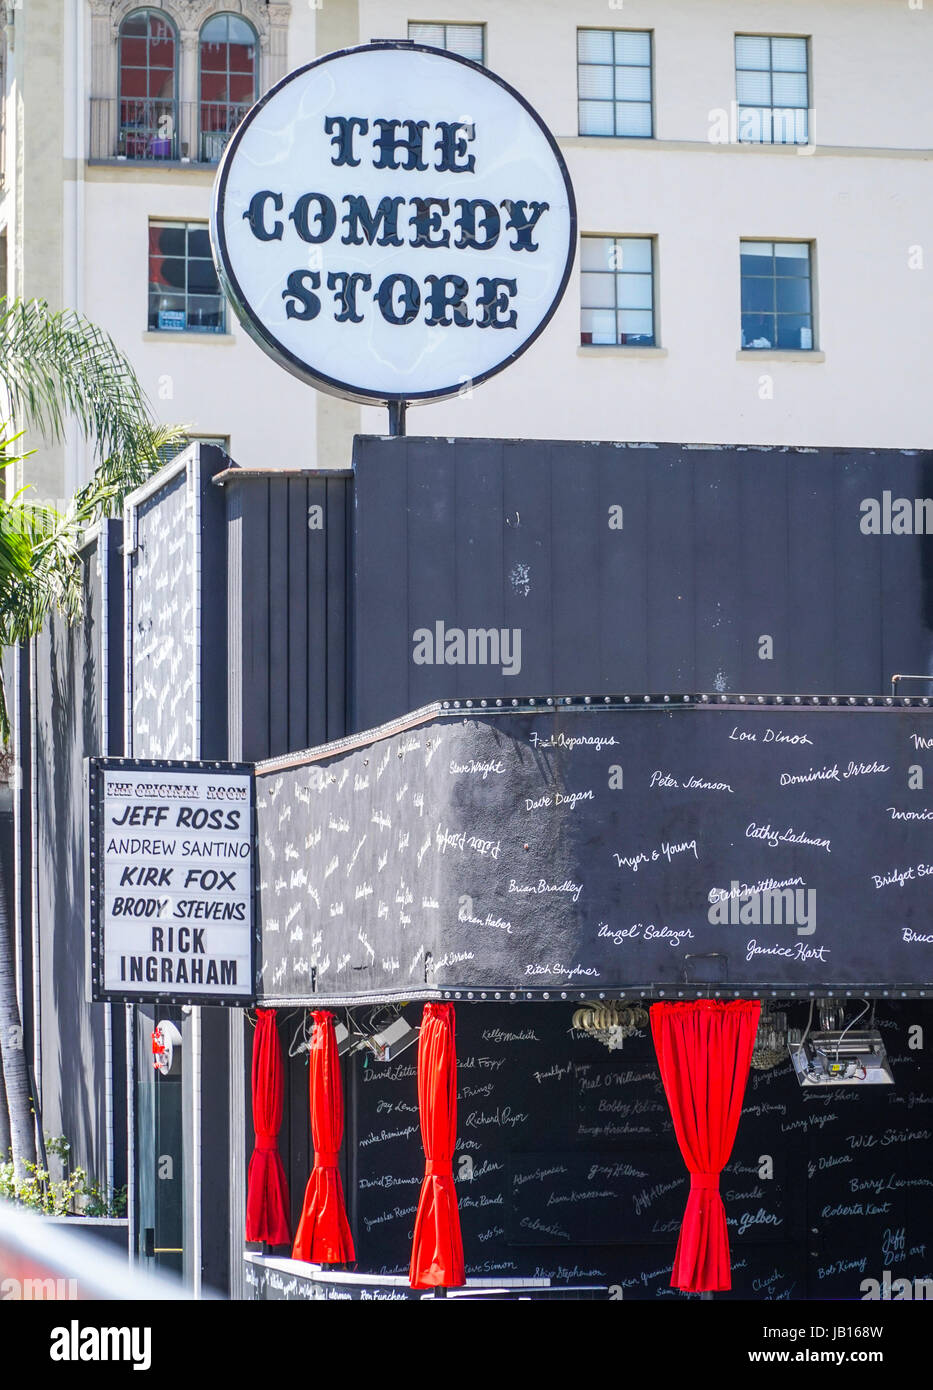 The famous Comedy Store in LA - on Sunset Boulevard - LOS ANGELES - CALIFORNIA Stock Photo